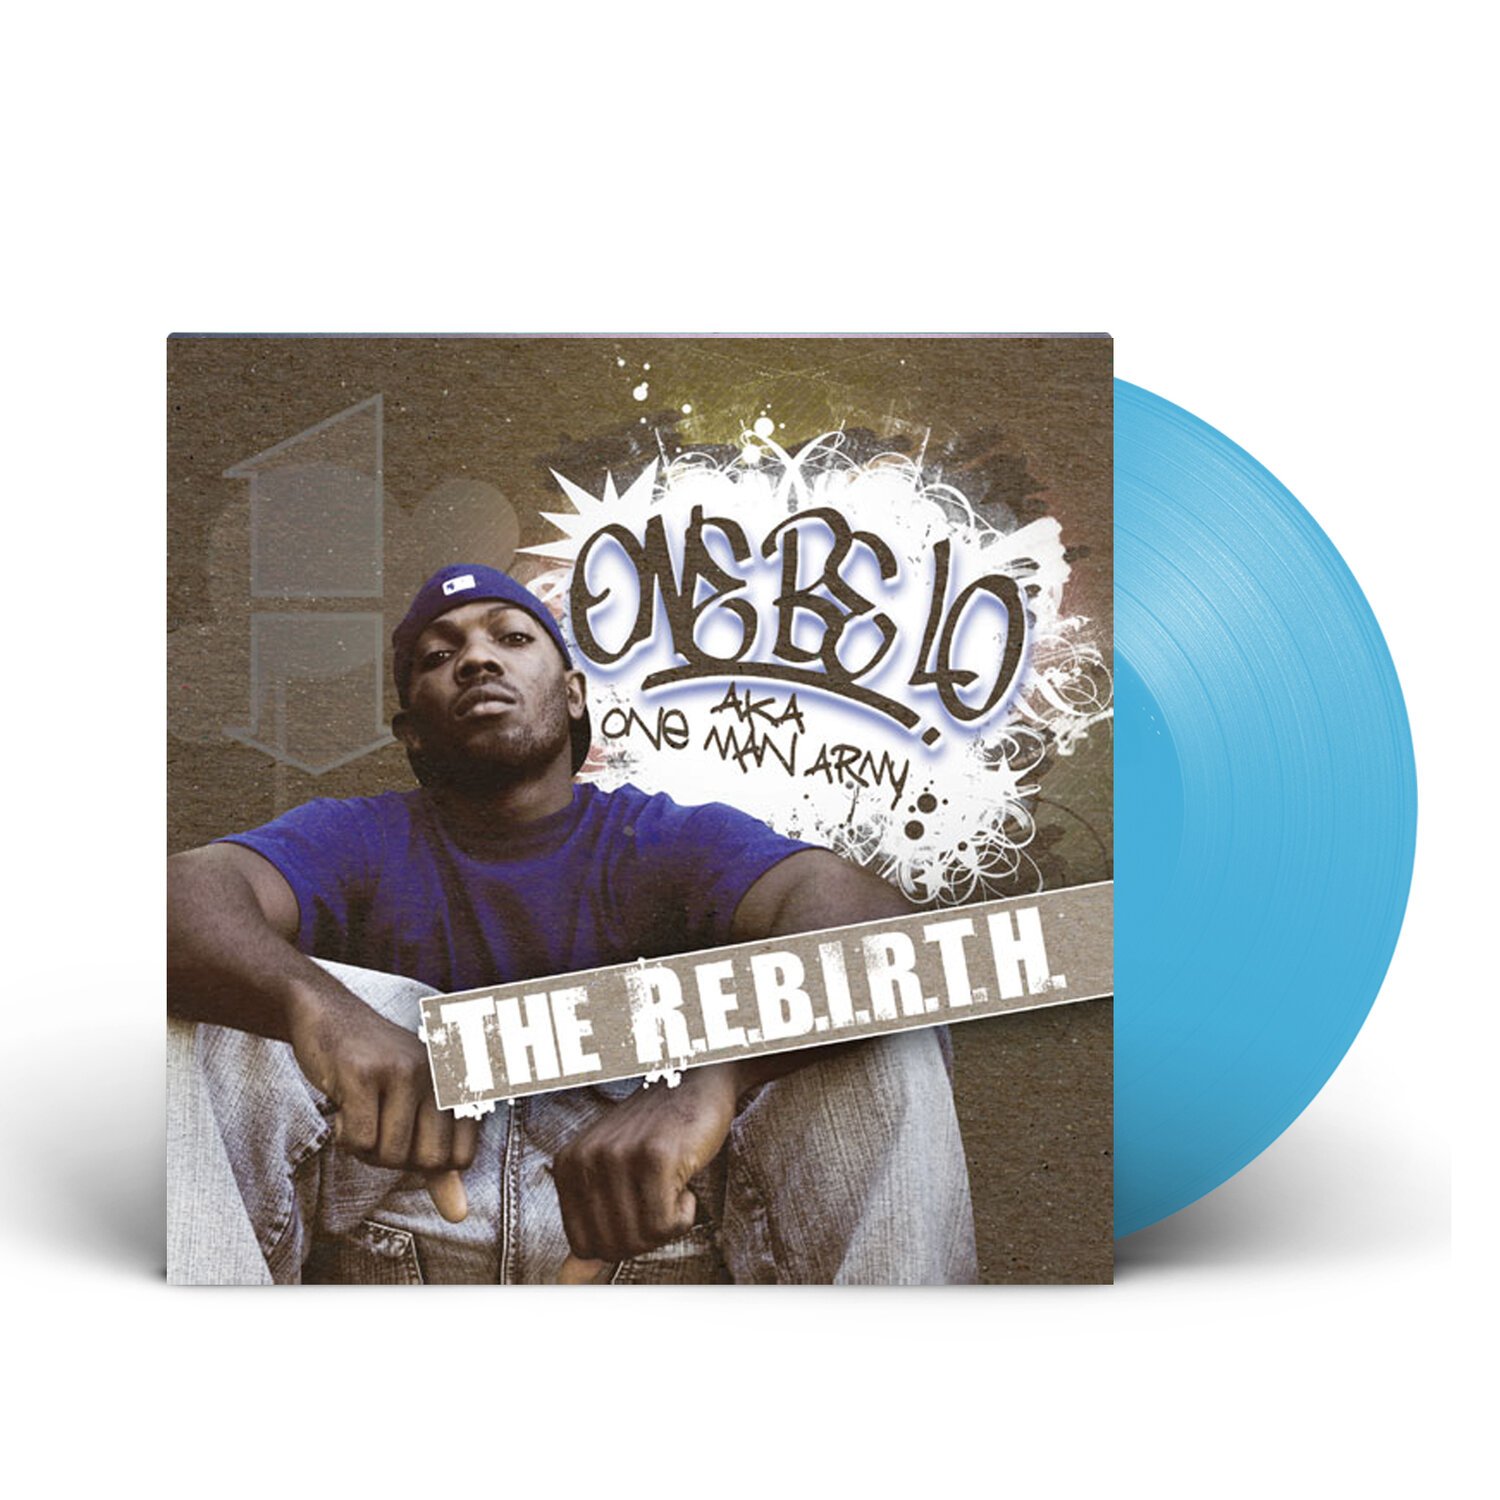 One Be Lo - The R.E.B.I.R.T.H. (2xLP) – $30.00